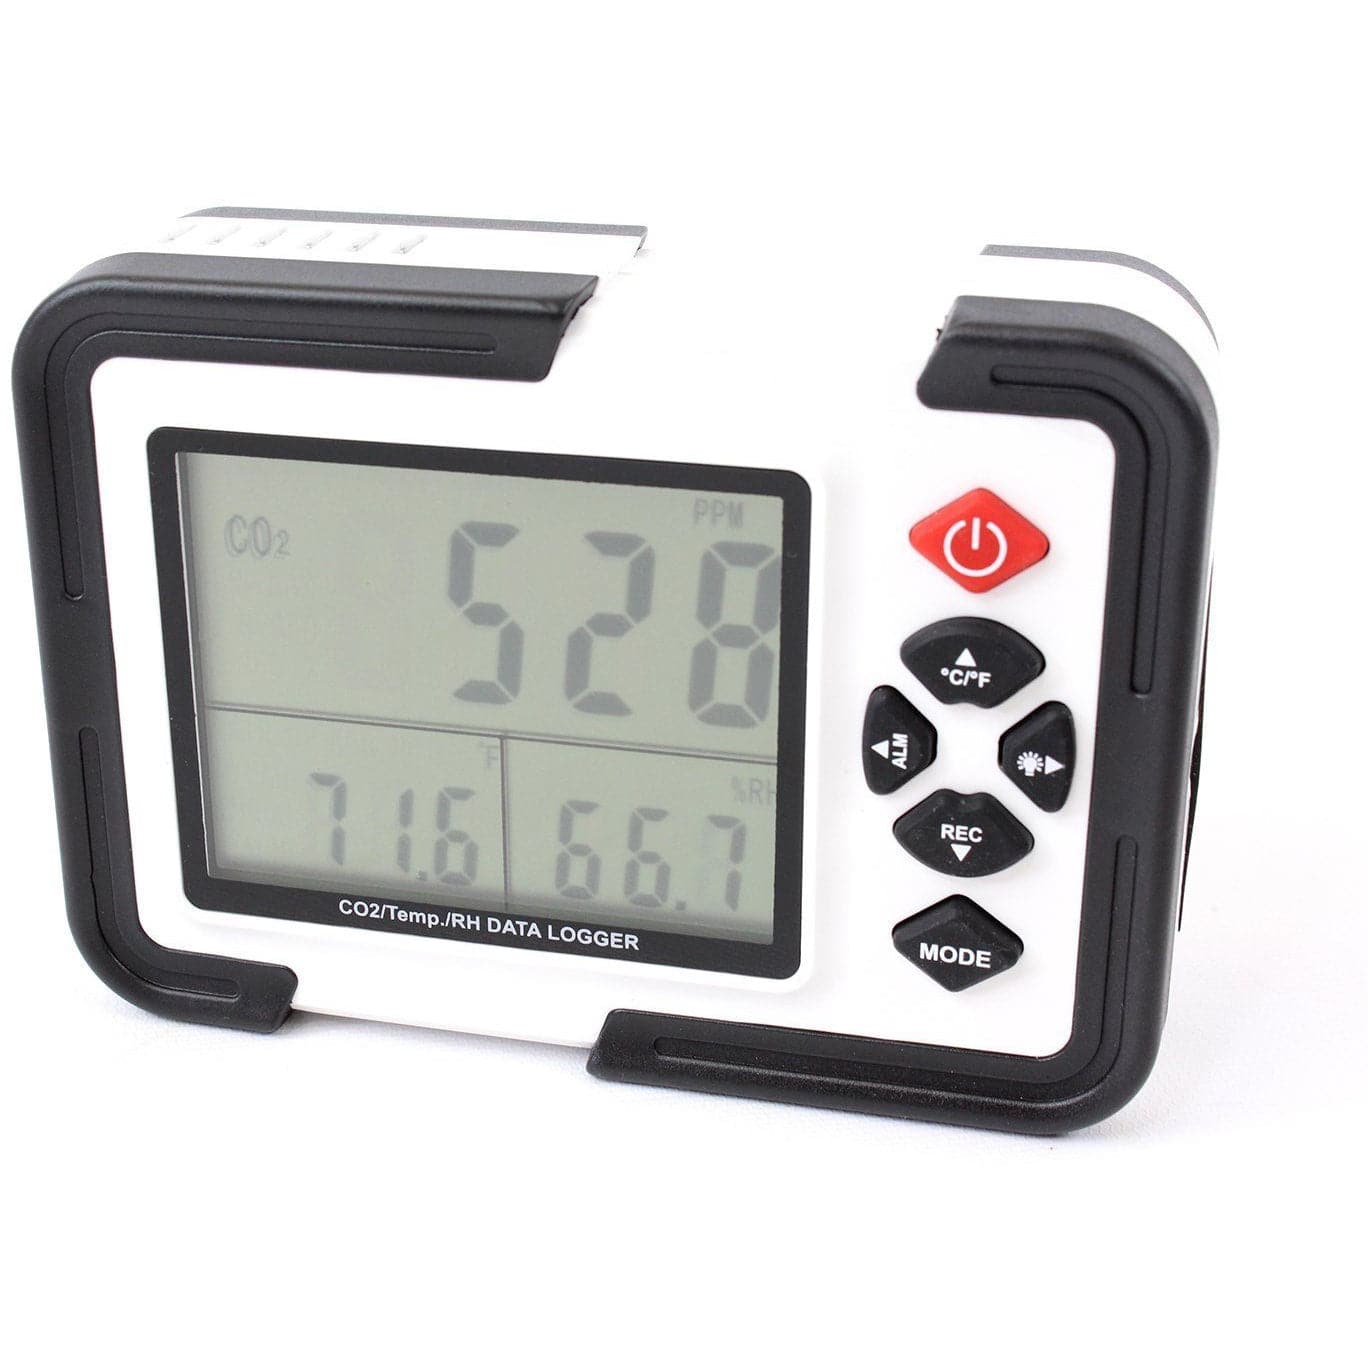 BVV Carbon Dioxide CO2 PPM Monitor Air Temperature and Humidity Datalogger.